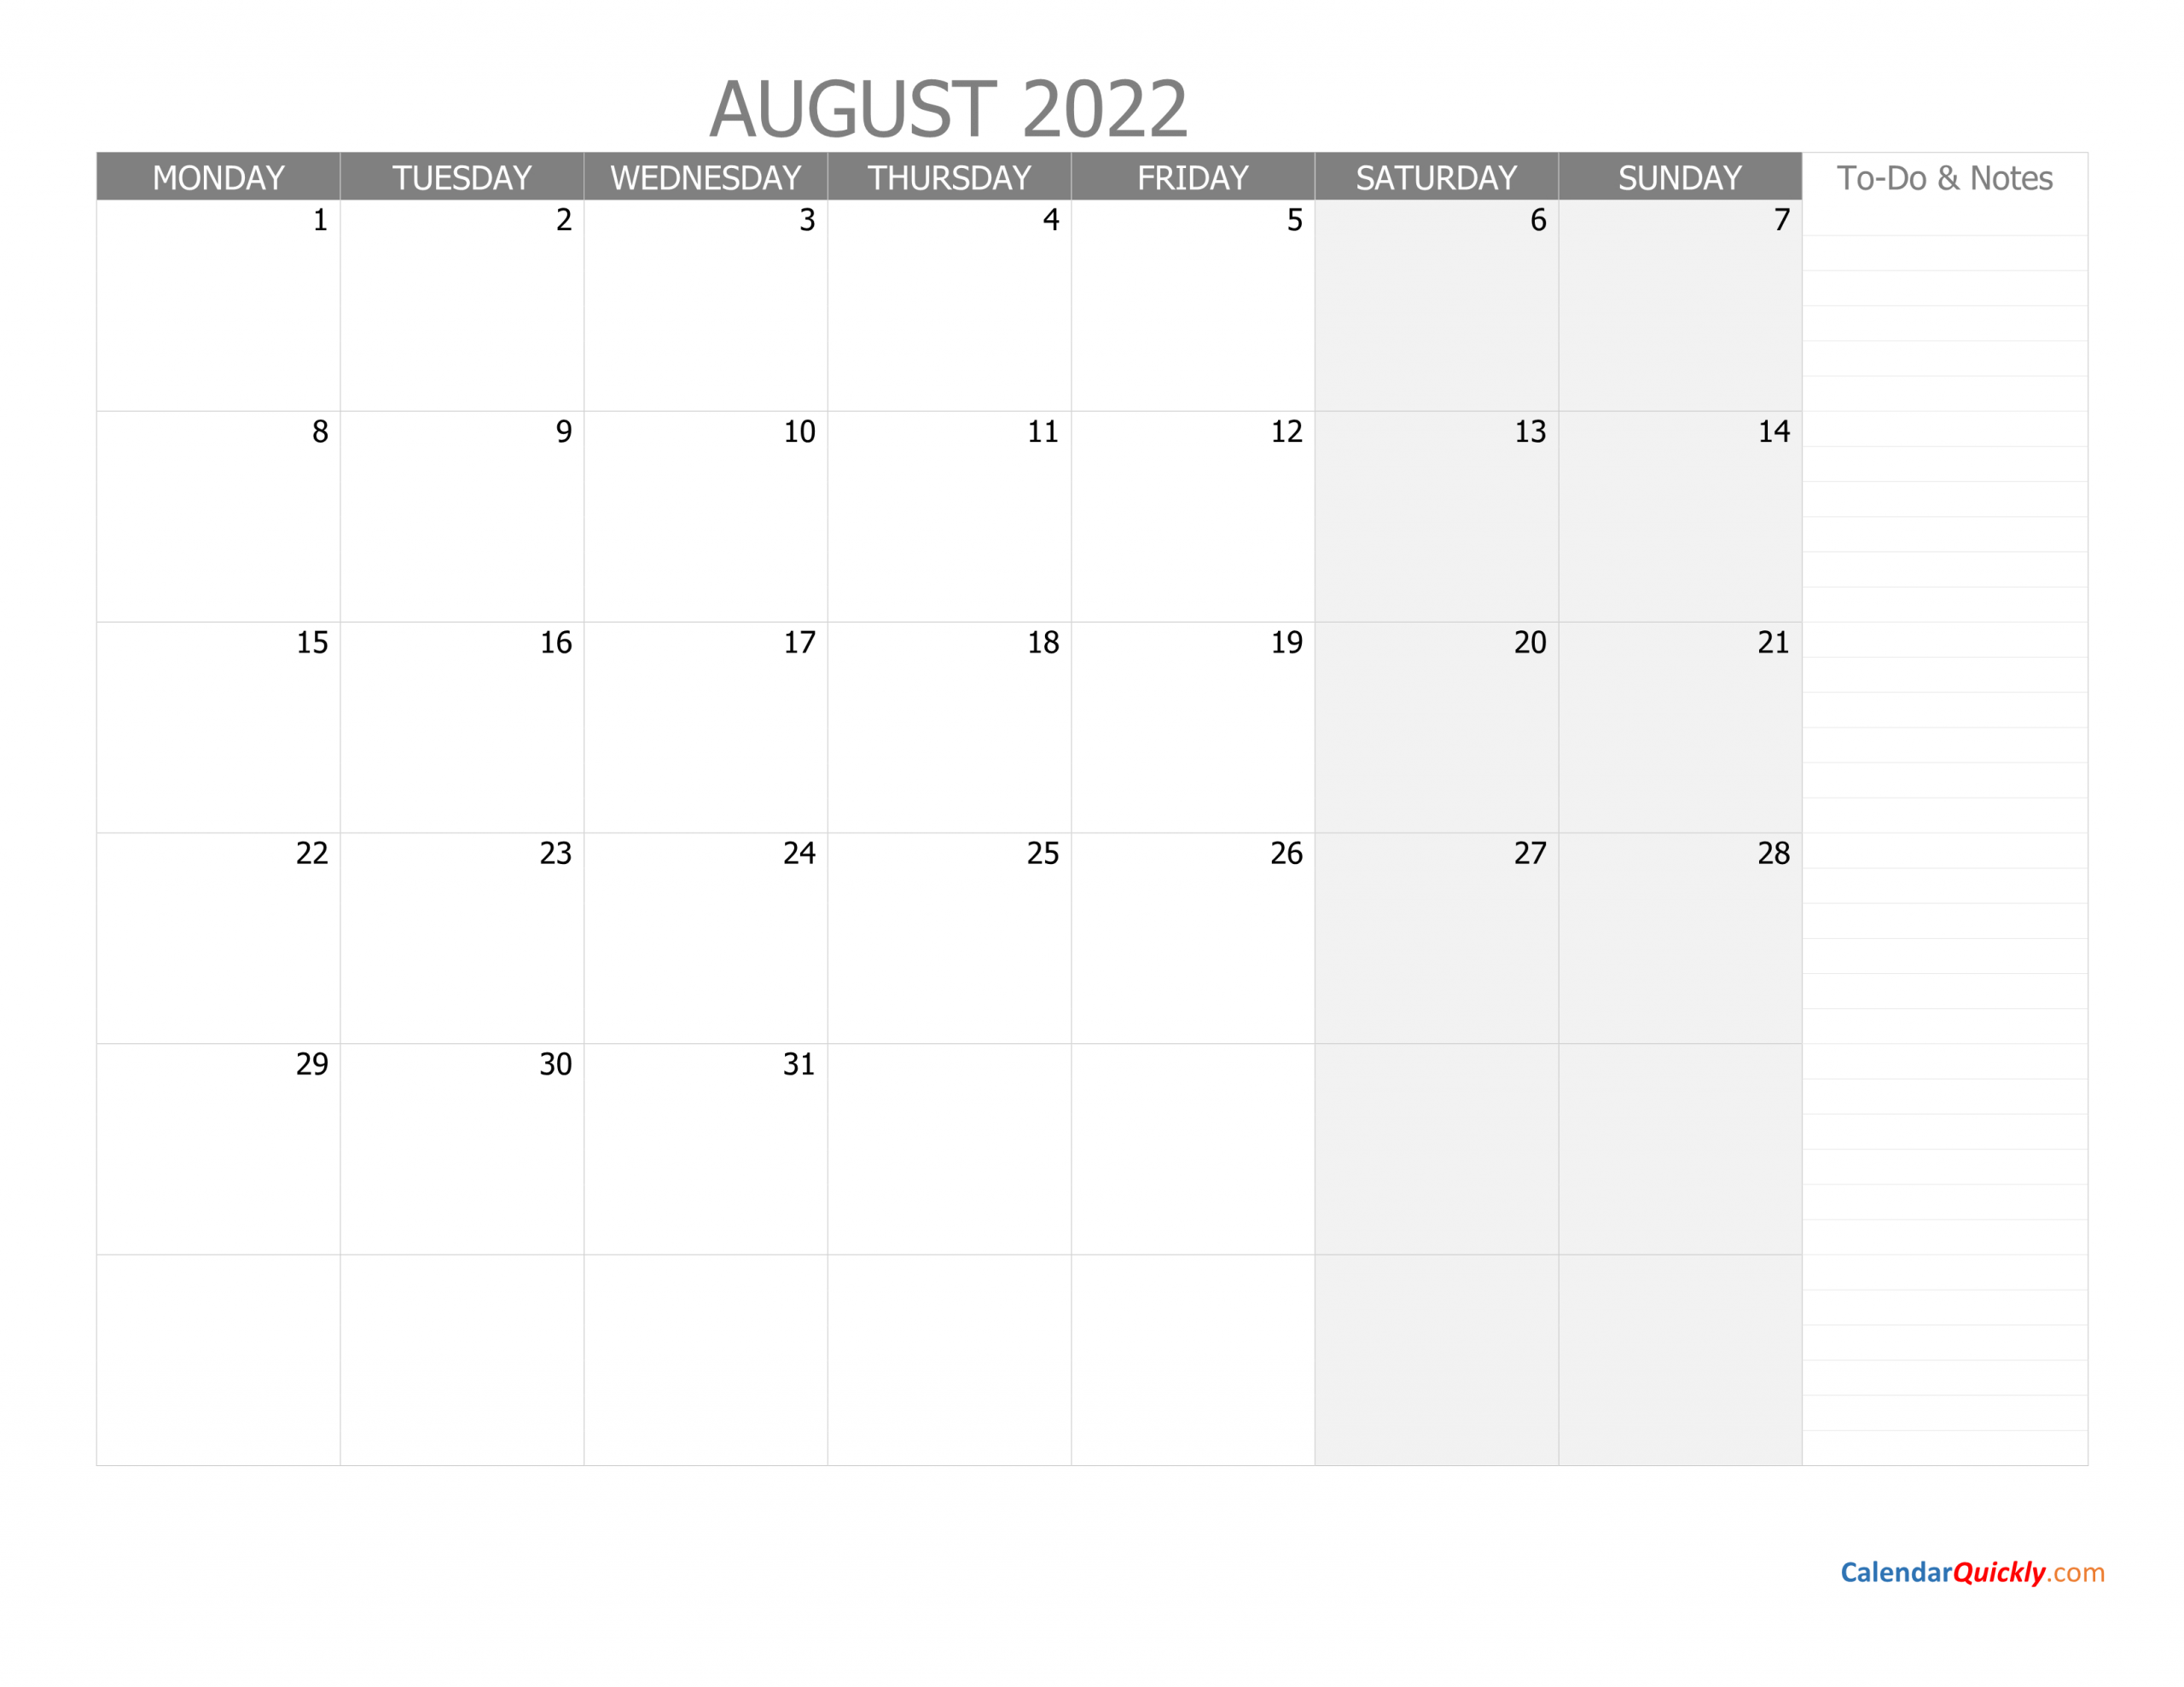 August Monday Calendar 2022 With Notes Calendar Quickly